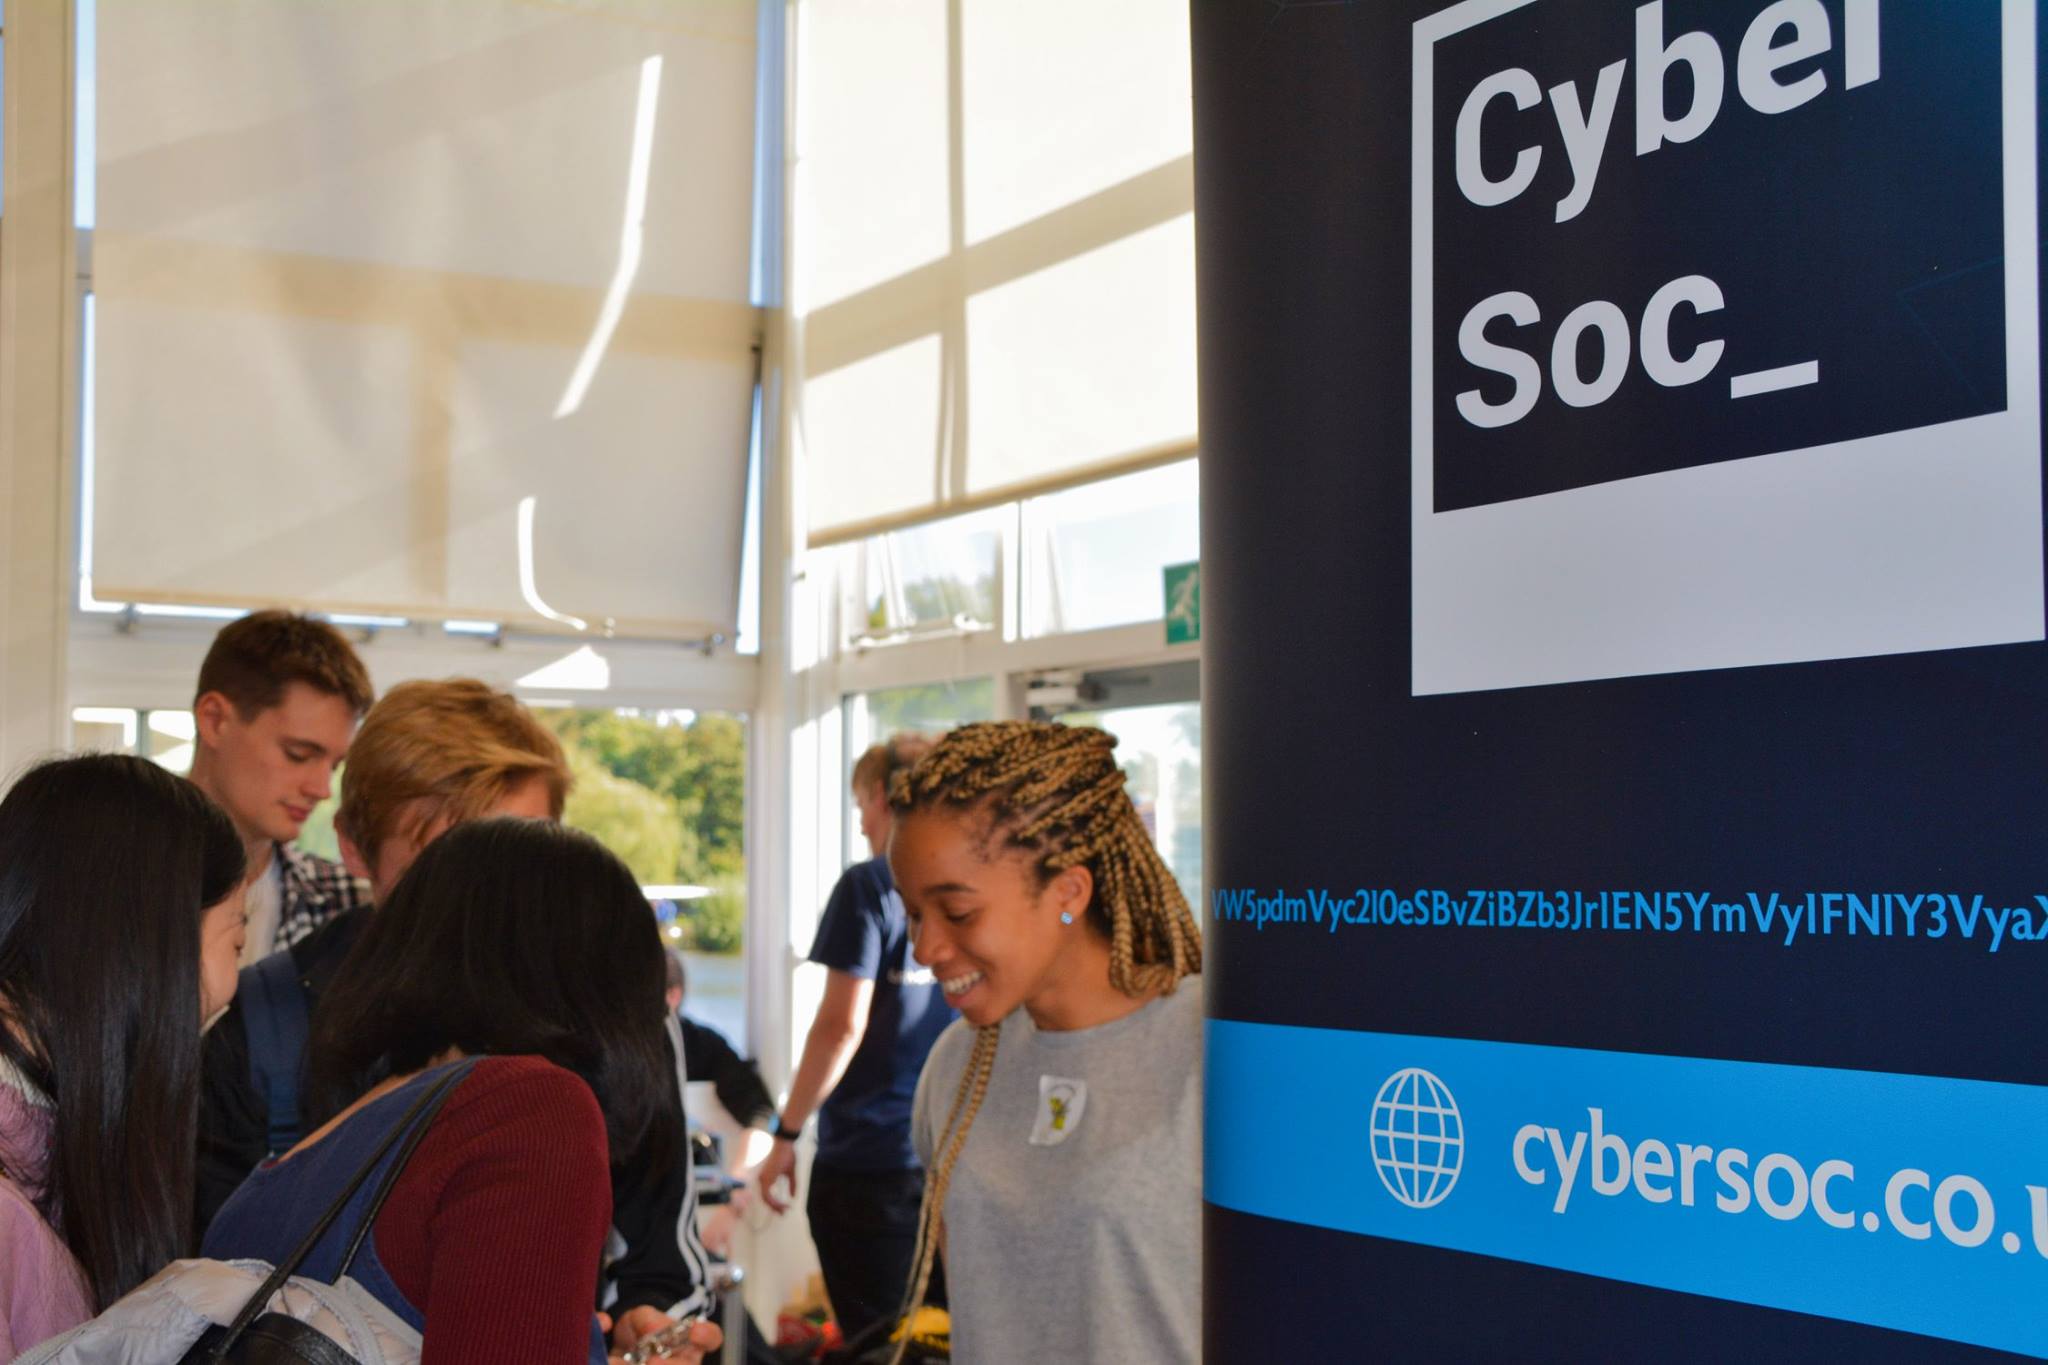 CyberSoc members and the society banner